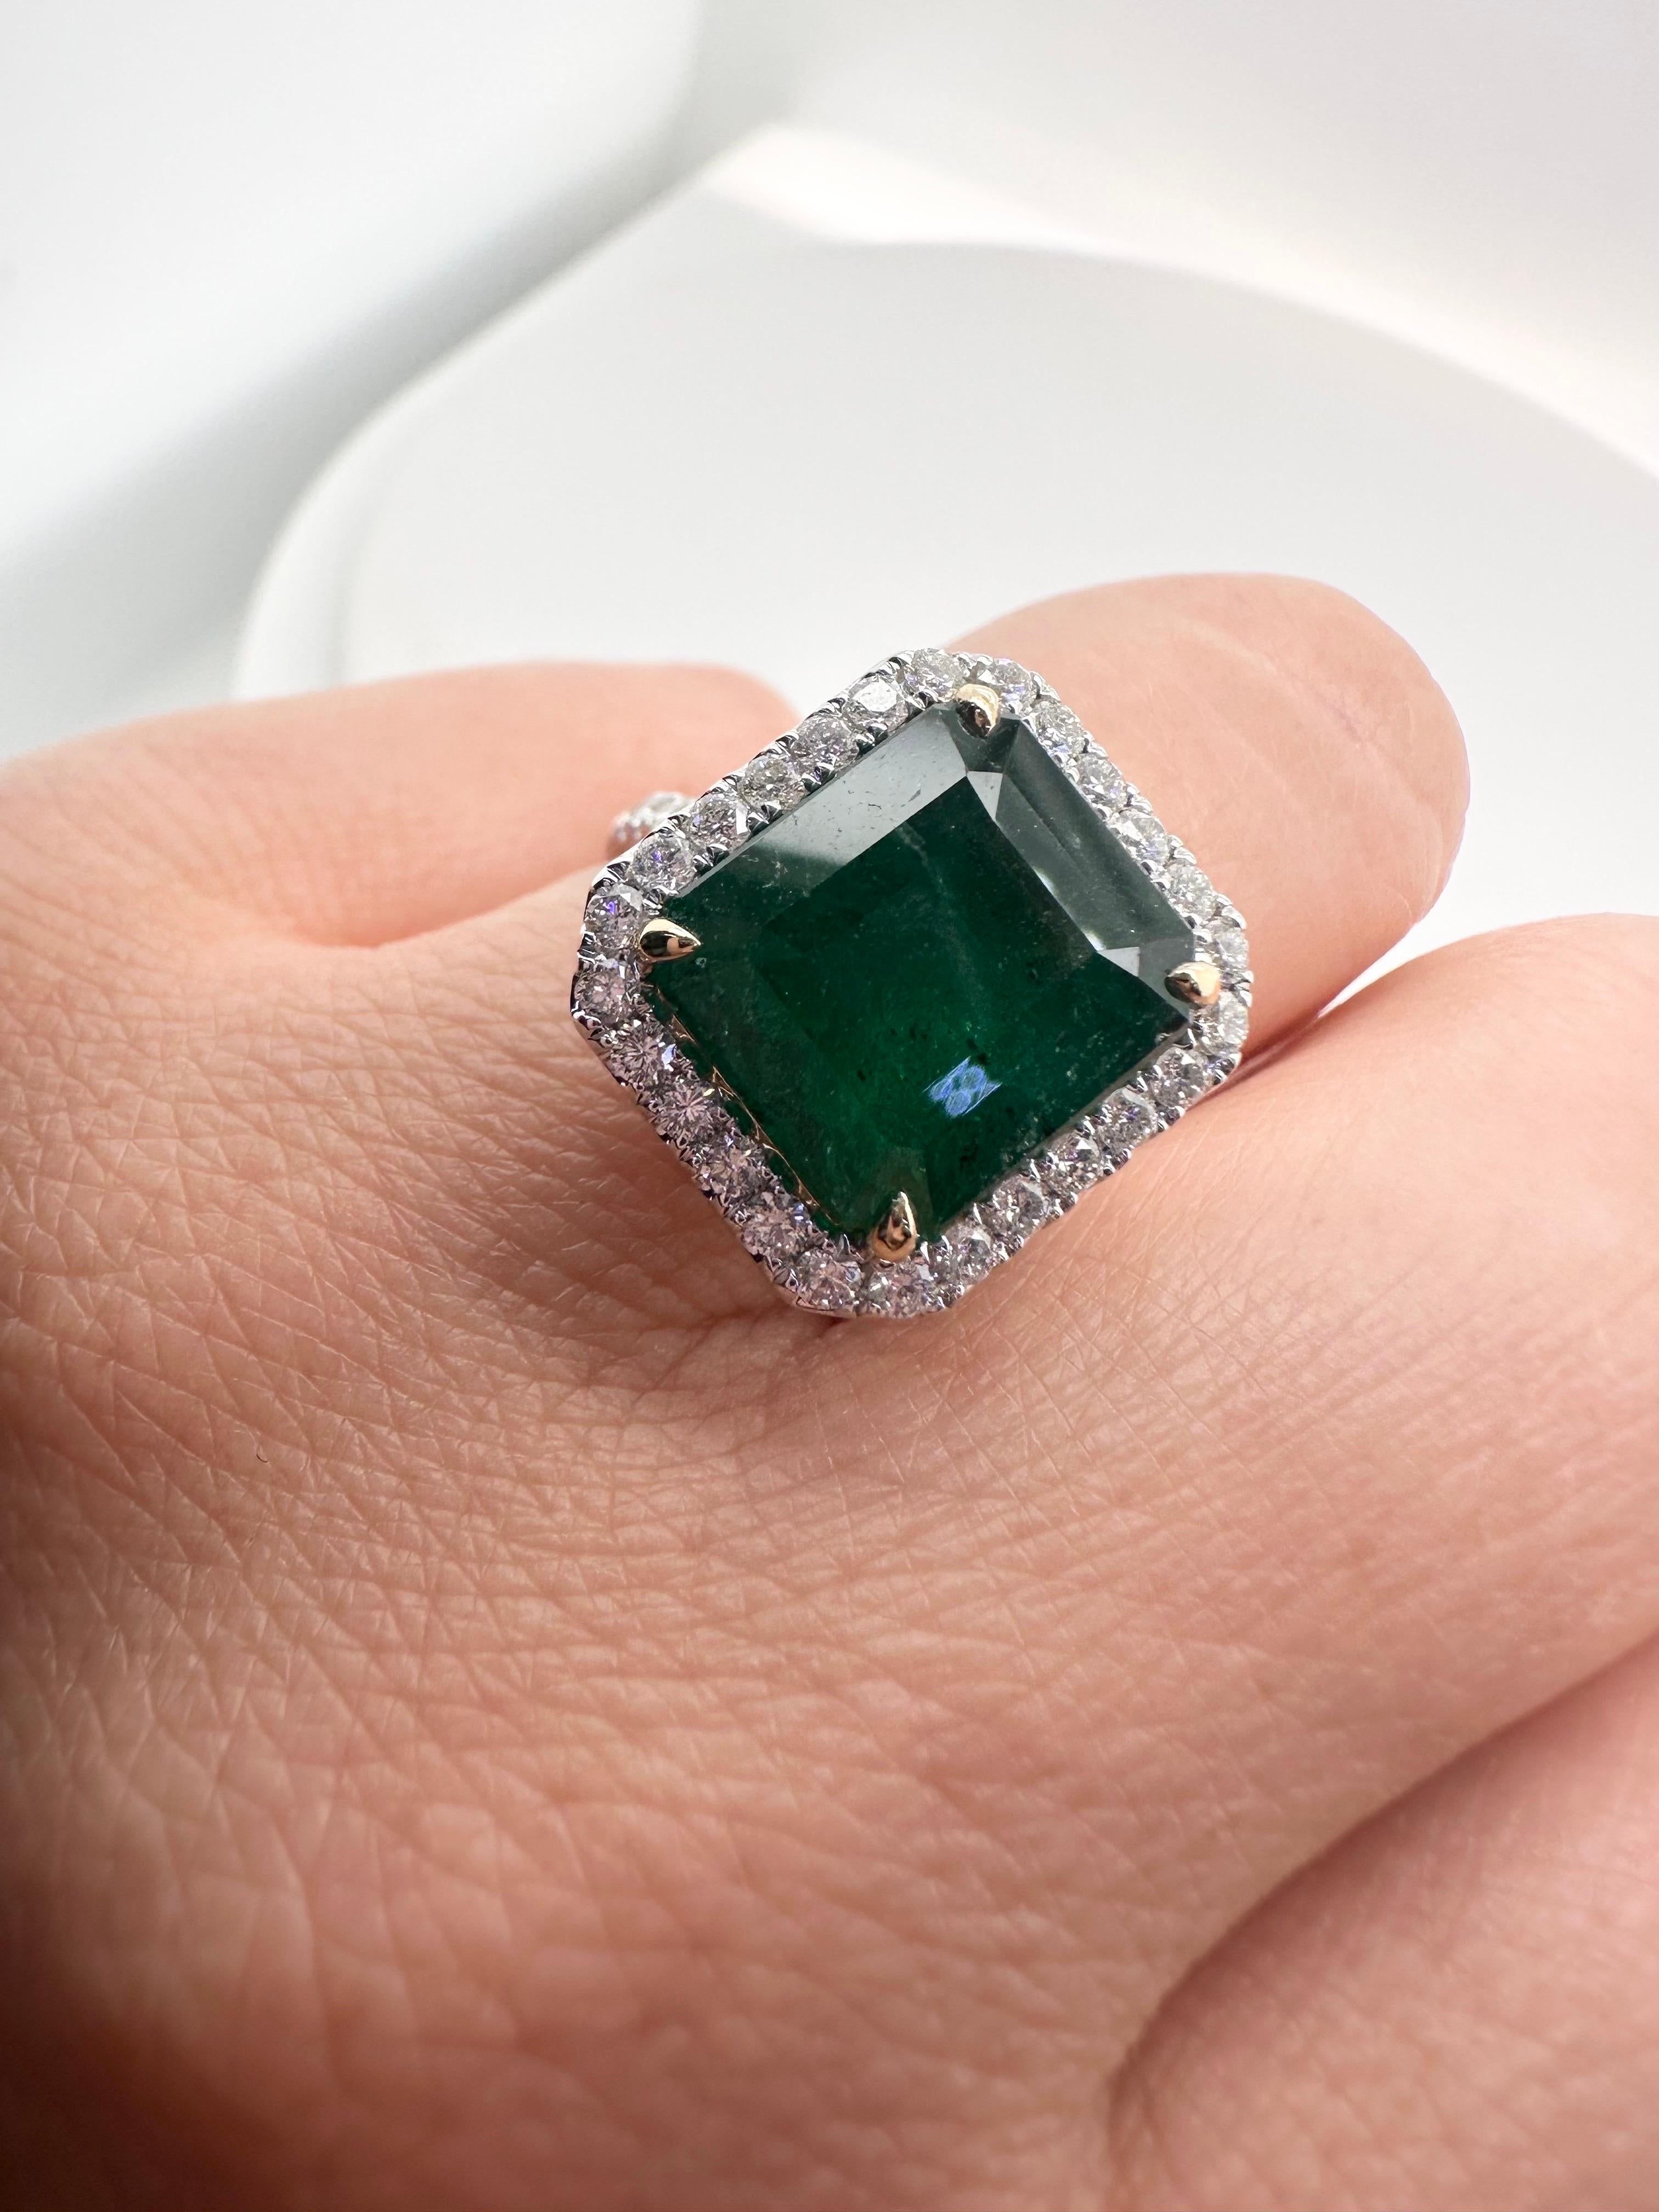 One of a kind green Emerald diamond ring, made in gorgeous cocktail style in 18KT gold.

Metal Type: 18KT
Gram Weight:6.27 grams 

Natural Emerald(s):
Color: Green
Cut:Emerald
Carat: 7.49ct
Clarity: Moderately Included

Natural Diamond(s): 
Color: